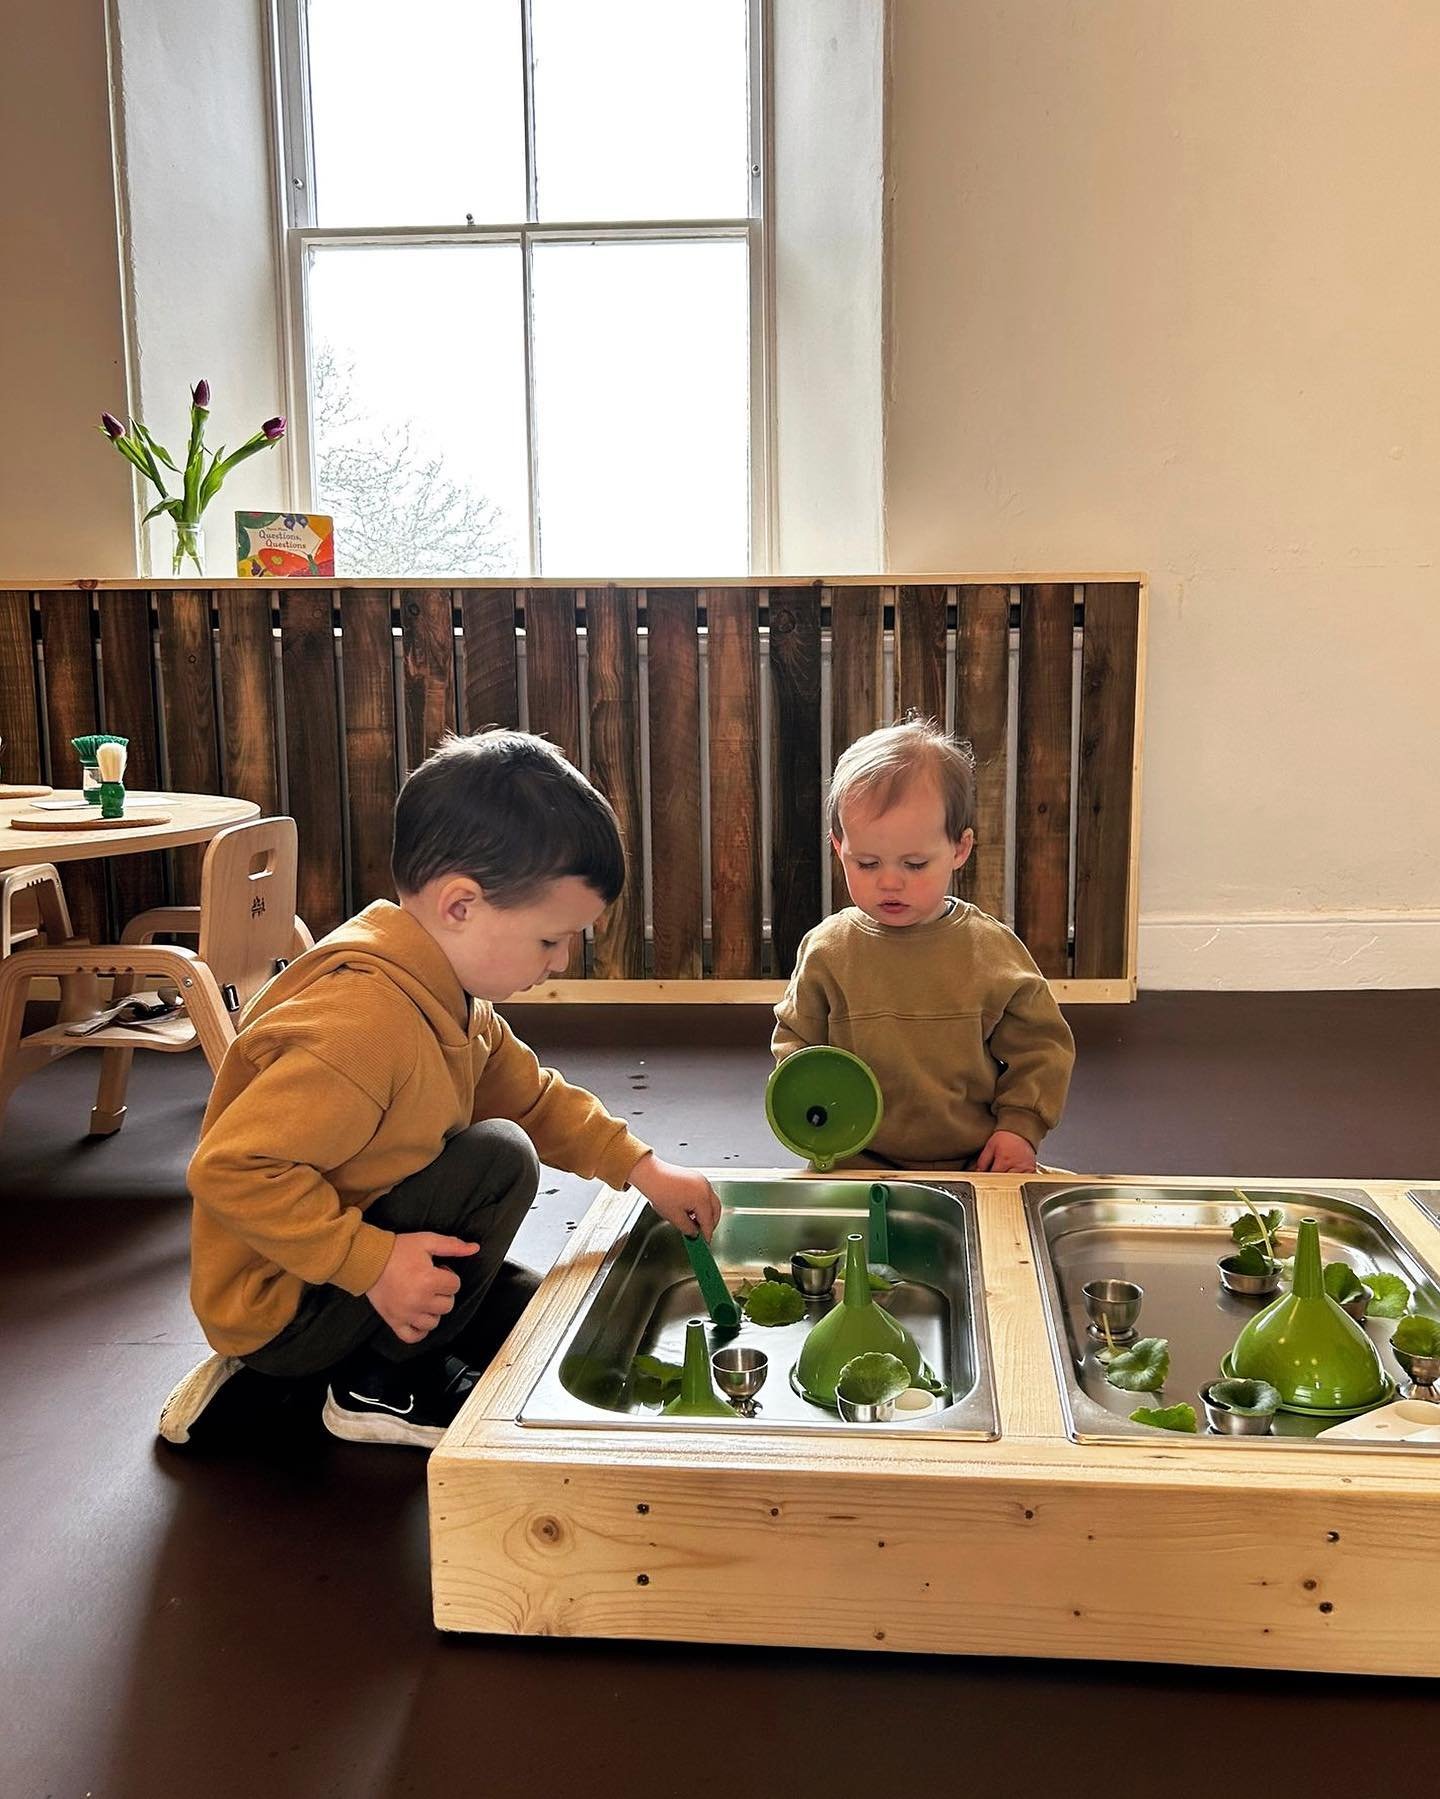 Our beautiful indoor environments reflect the provision provided outdoors!

Embedding learning experiences through playful continuous provision, indoors and out! 

This month the children have explored a &lsquo;Plant for Pollinators&rsquo; project pr